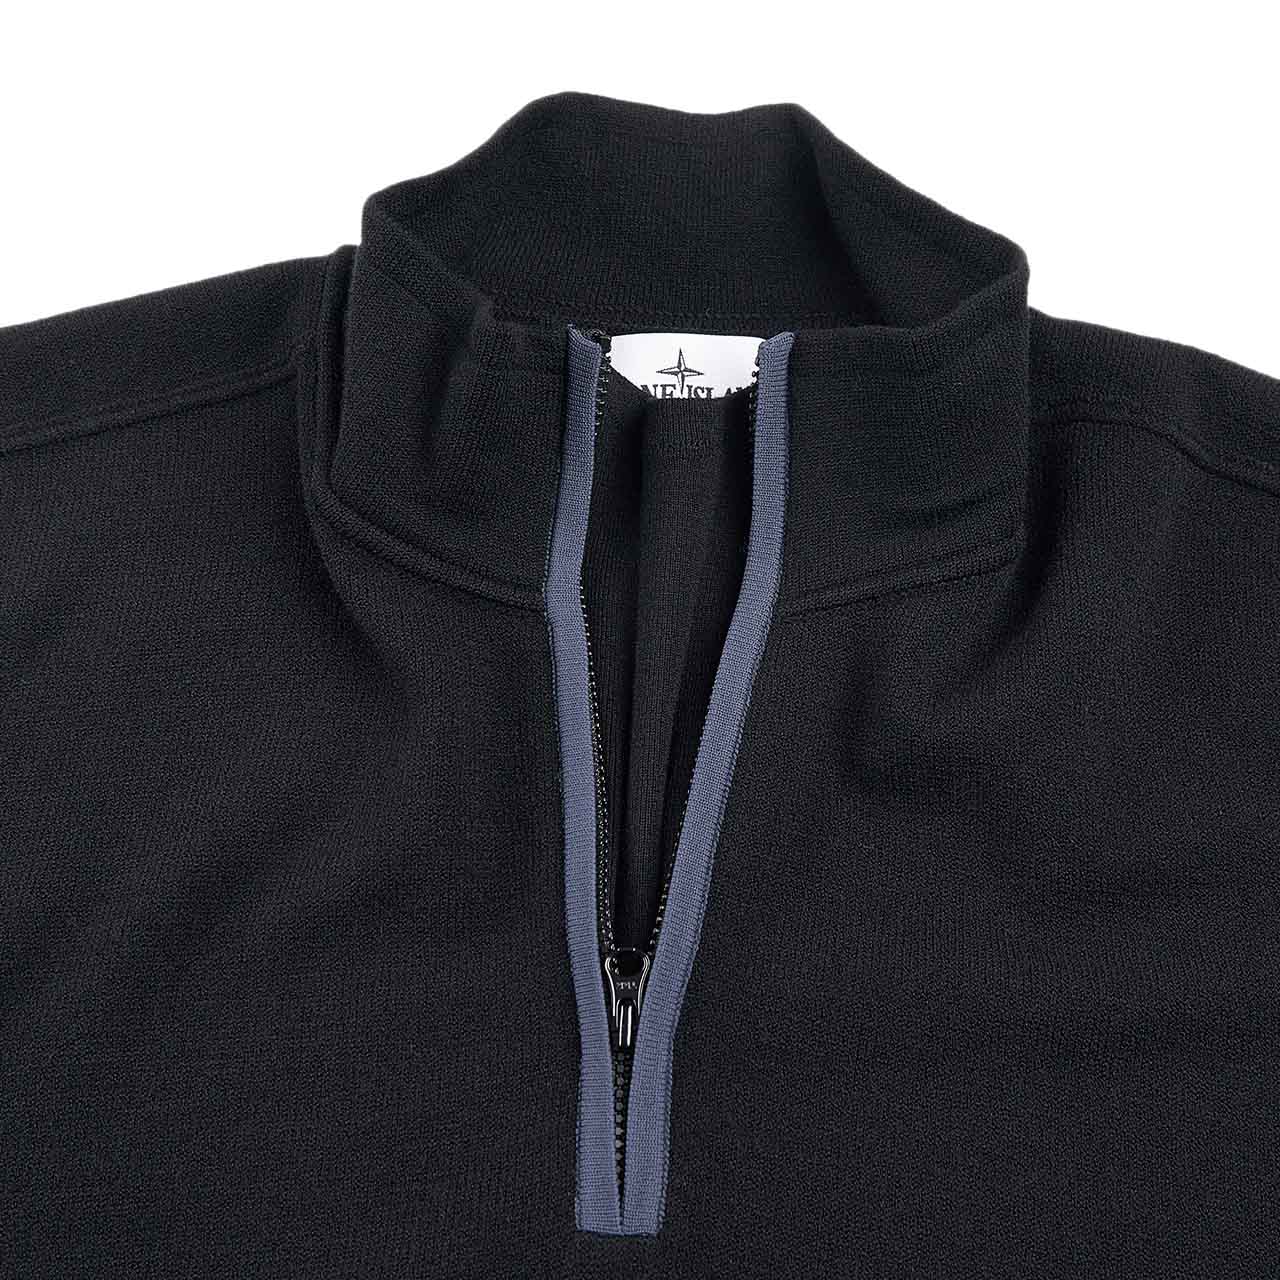 stone island knitted pullover (black)